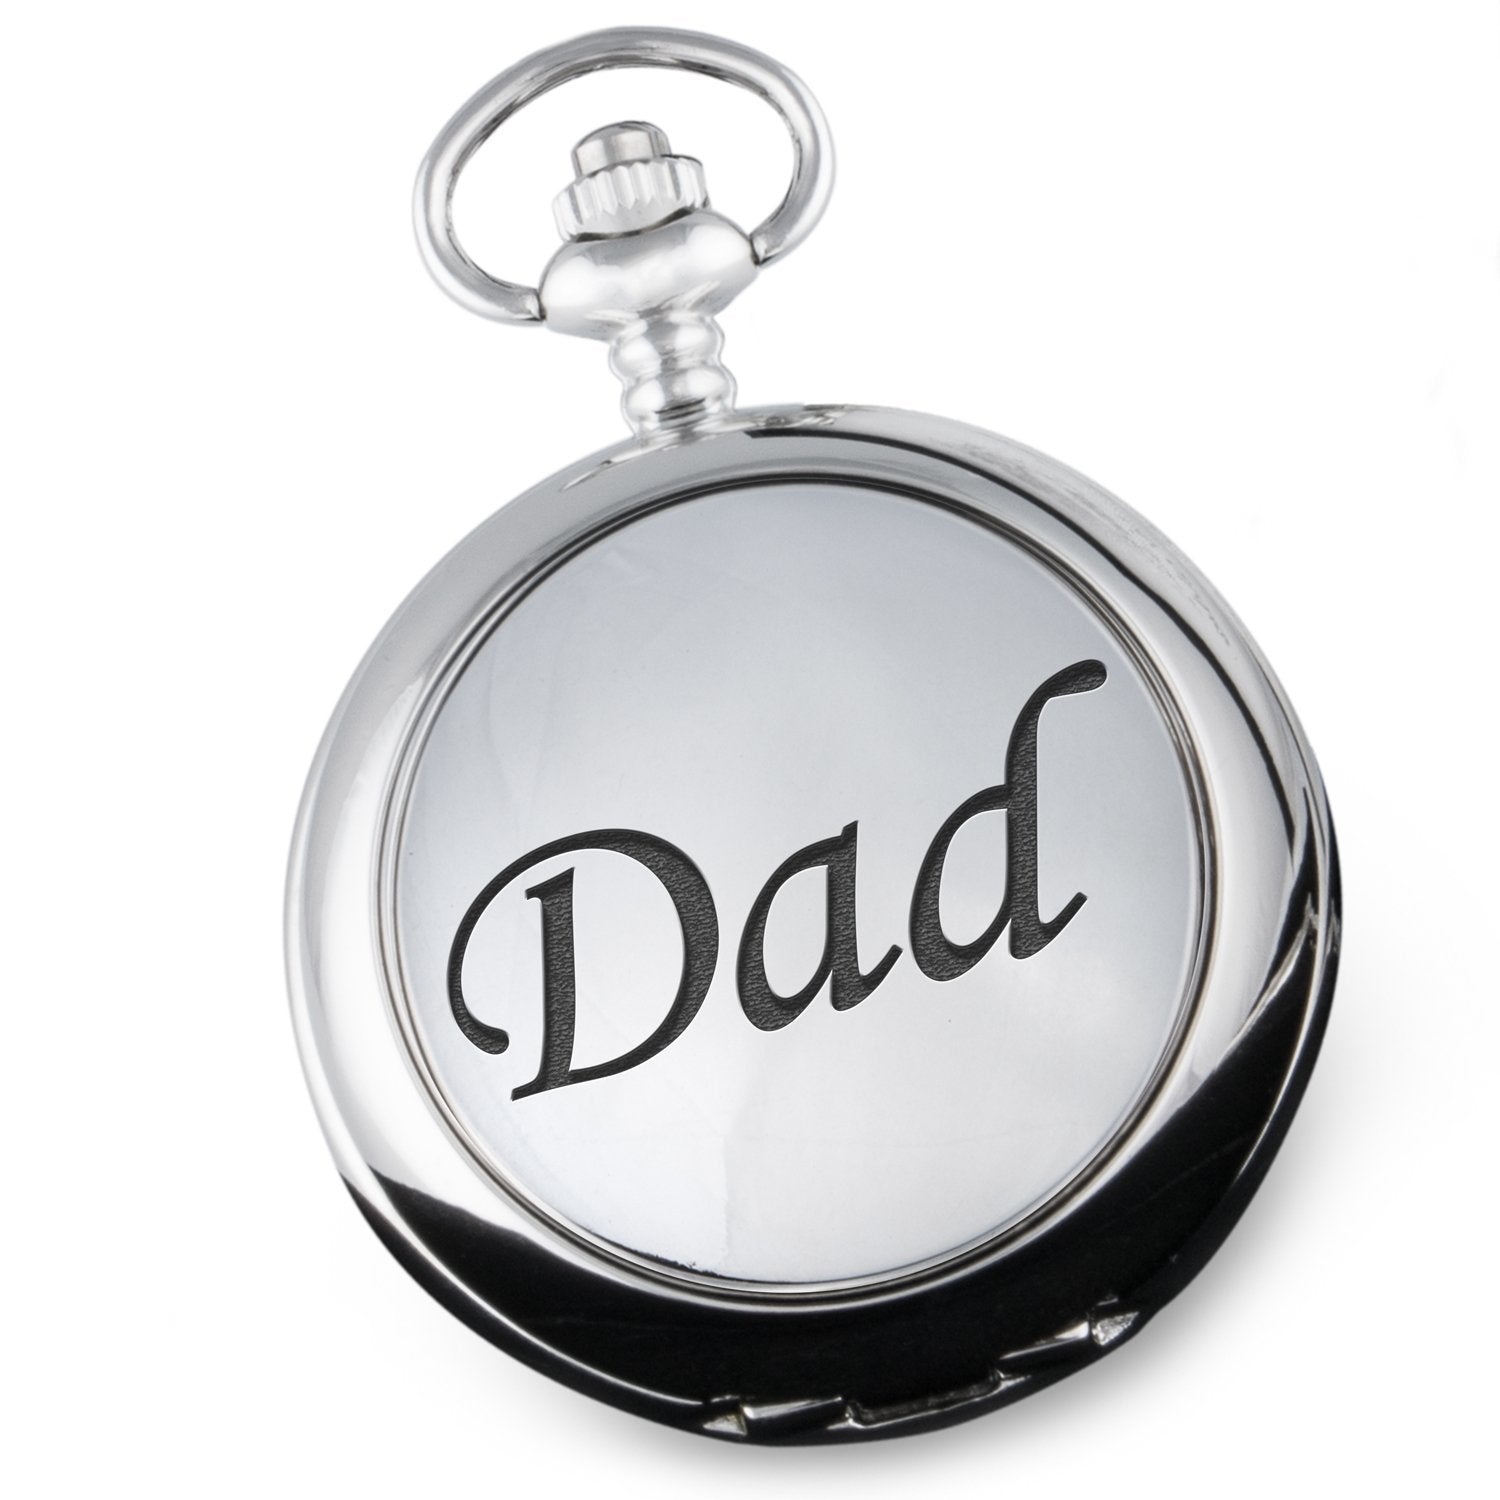 Dad Pocket Watch Christmas Birthday Gifts Retirement Father's Day Gift